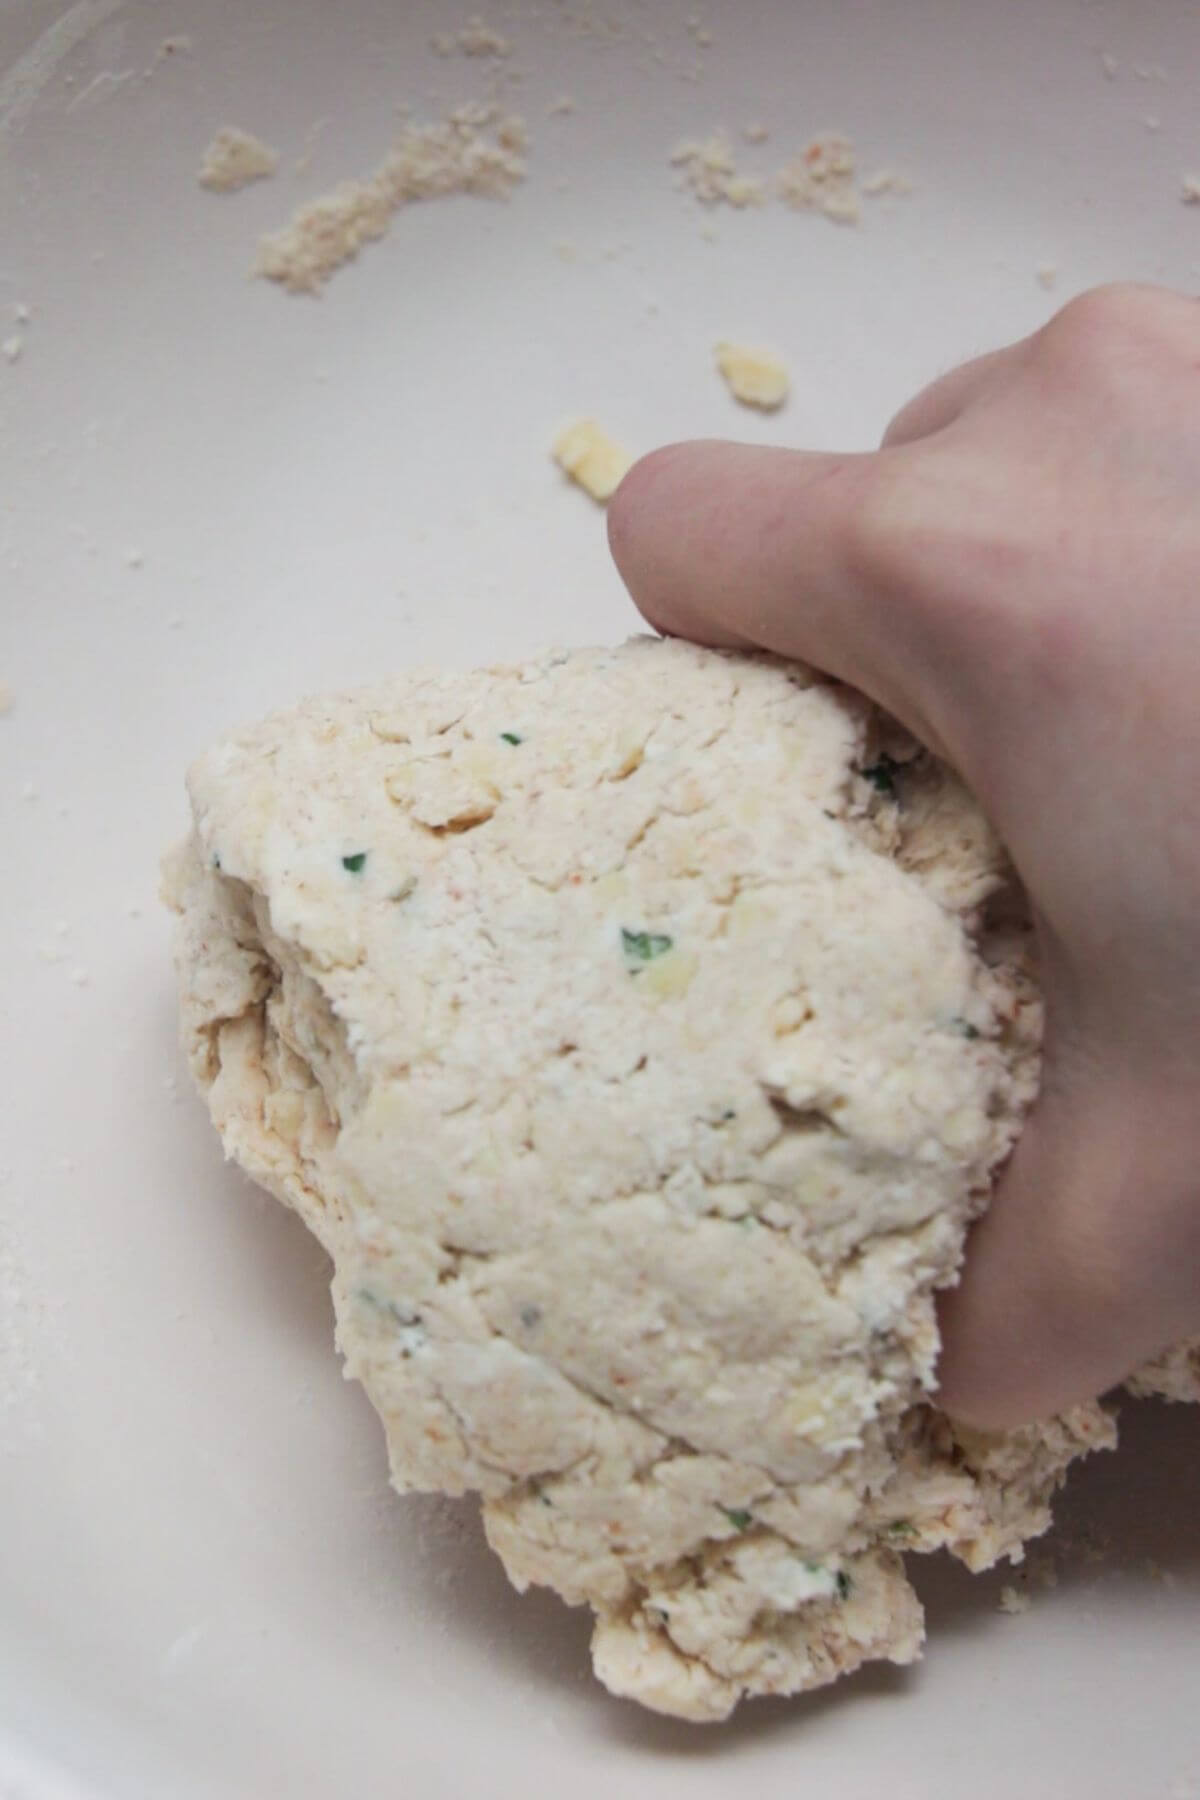 Hand forming cheese scone dough.